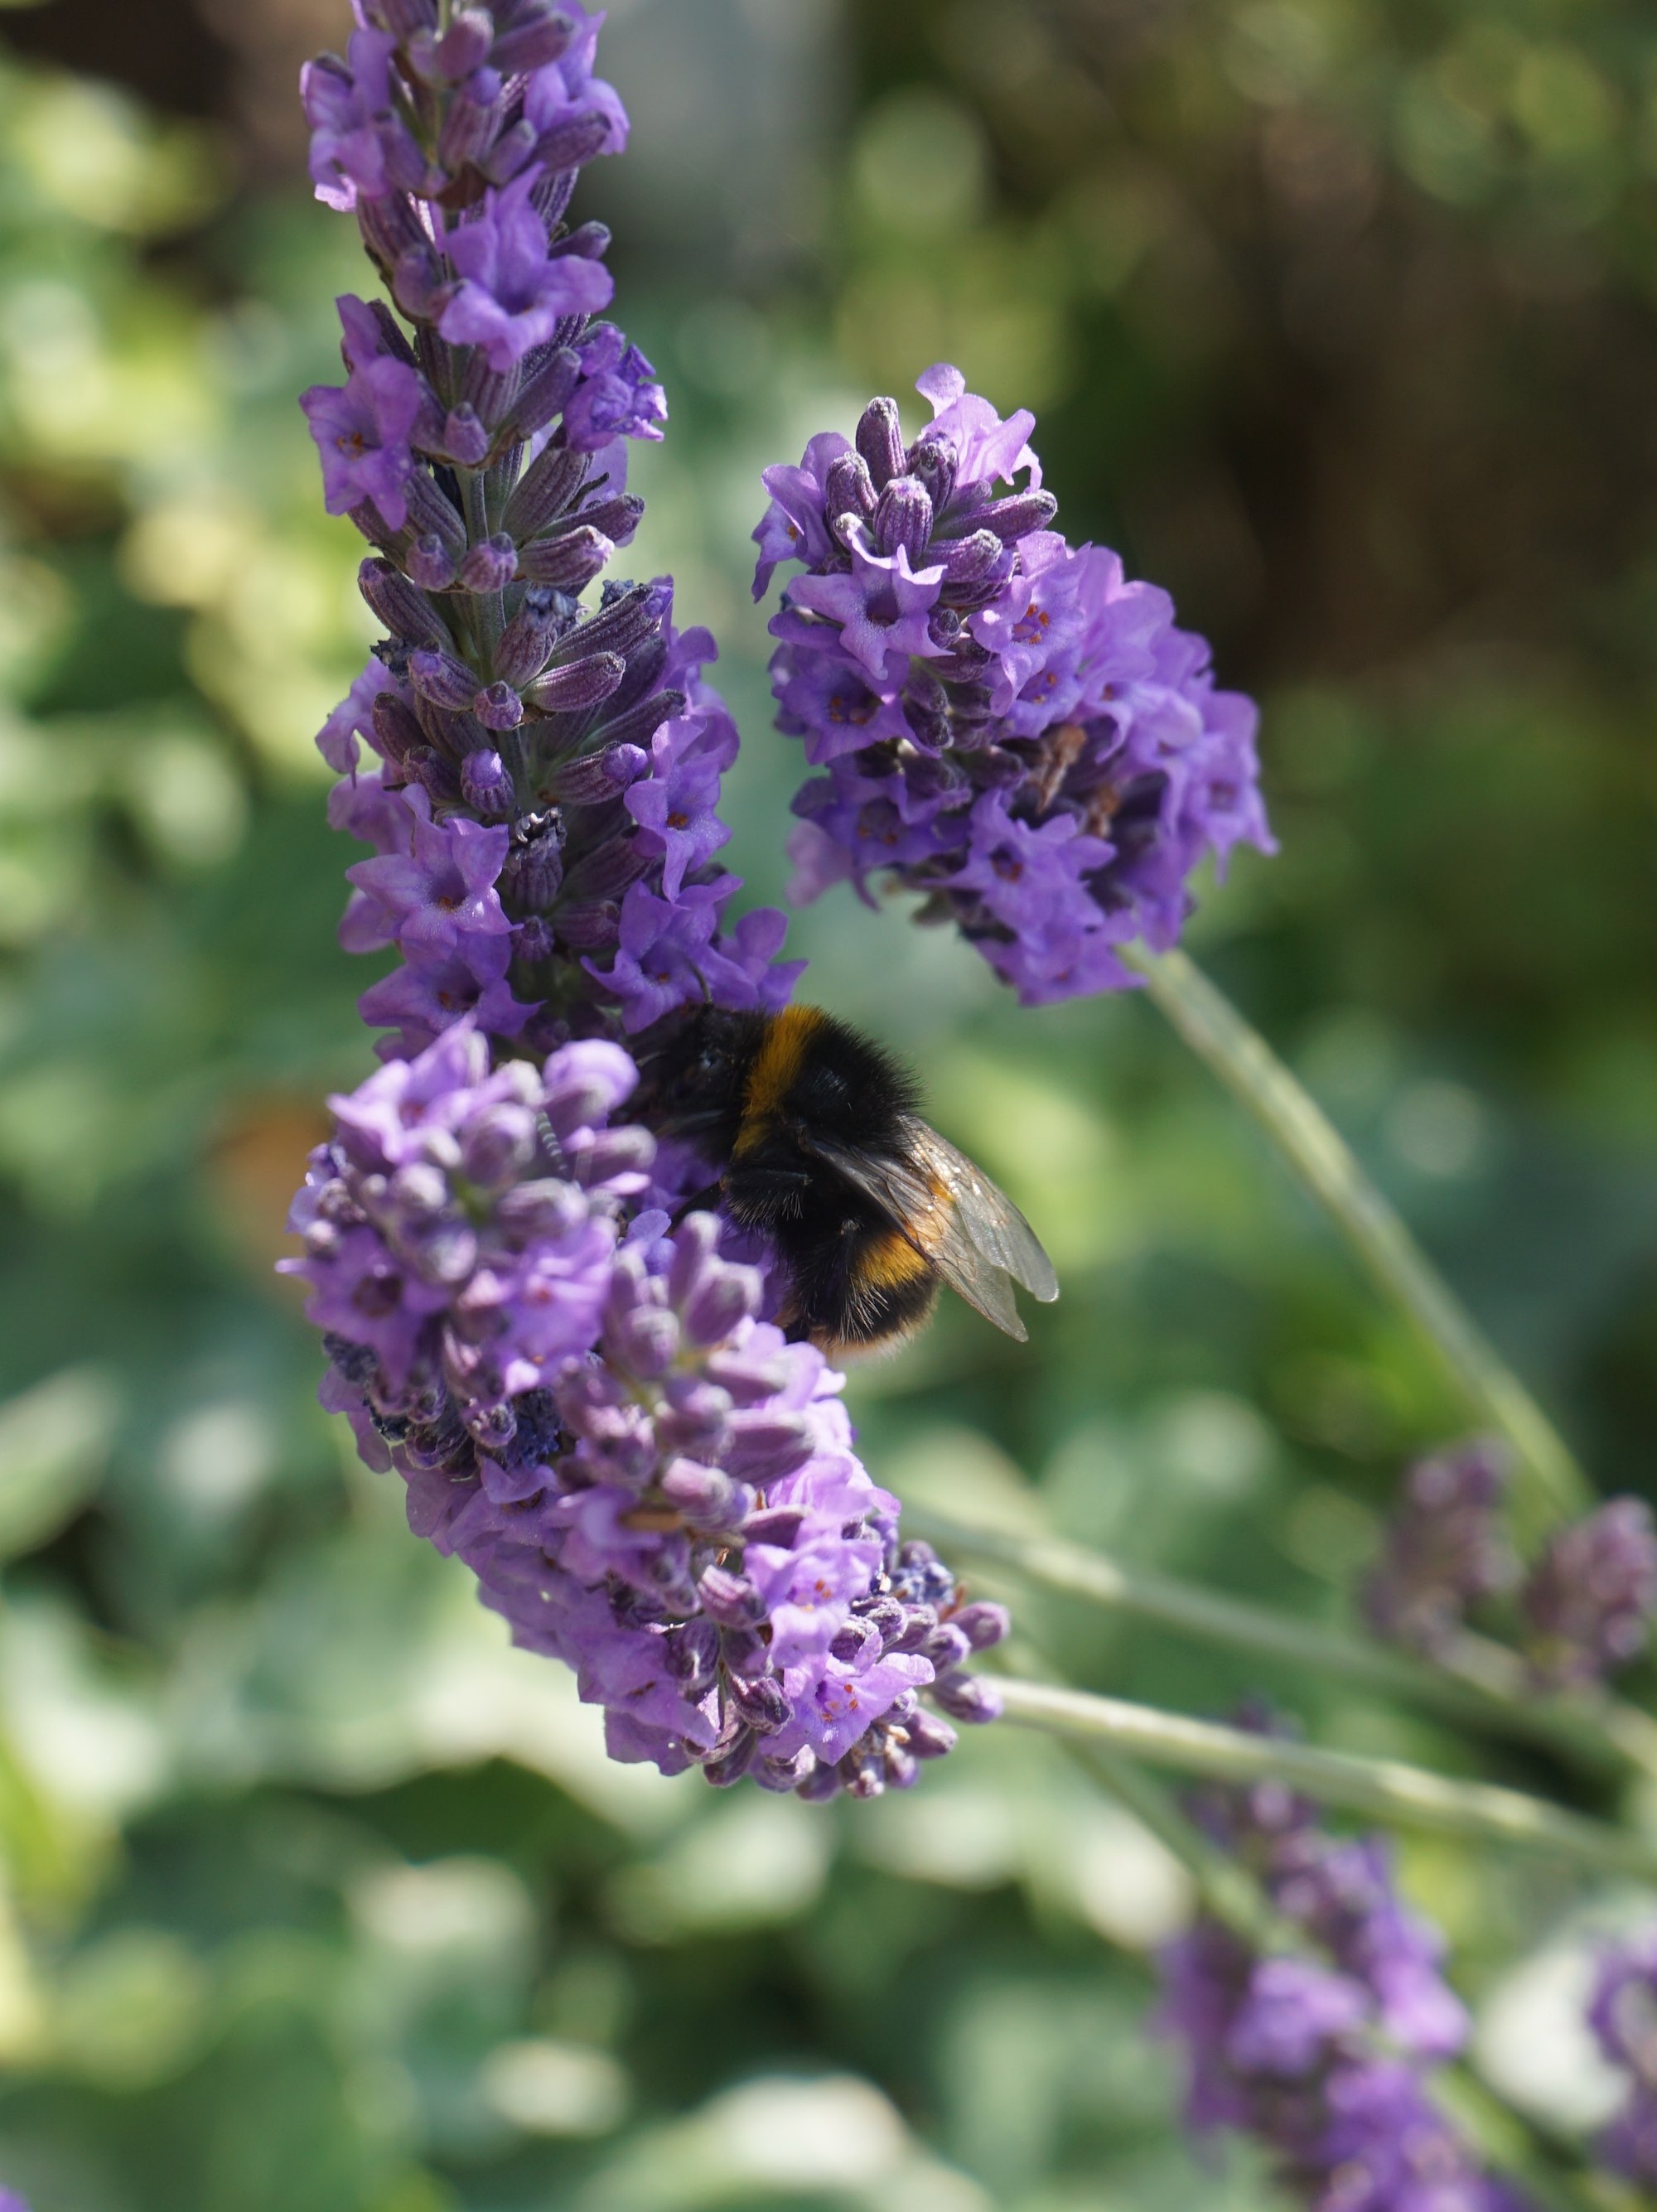 An Image of a Bumble bee on lavender